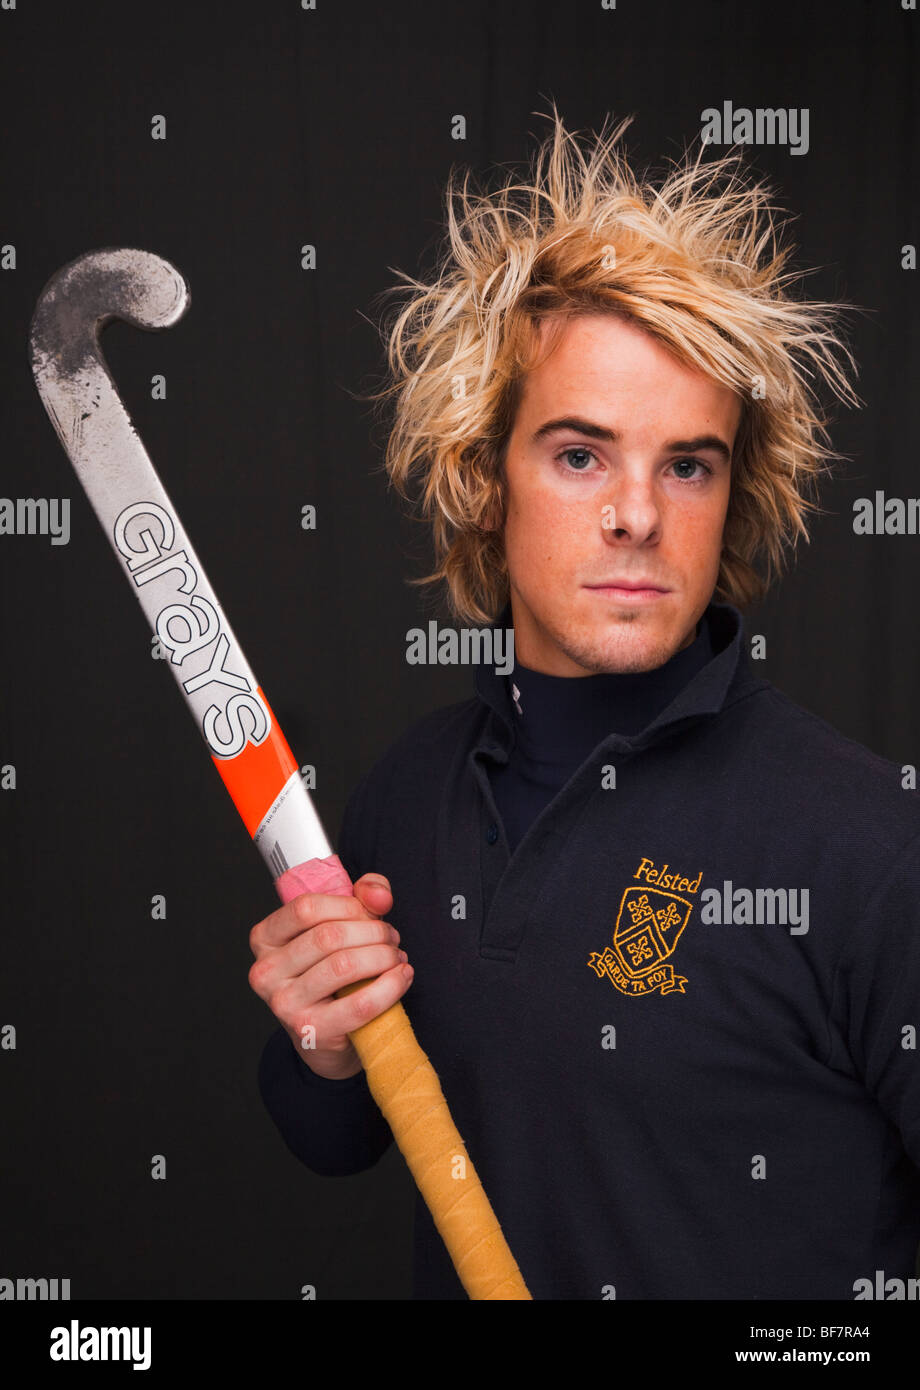 Head and shoulders portrait of a determined young man wearing a hockey shirt and holding a stick. UK, Britain Stock Photo